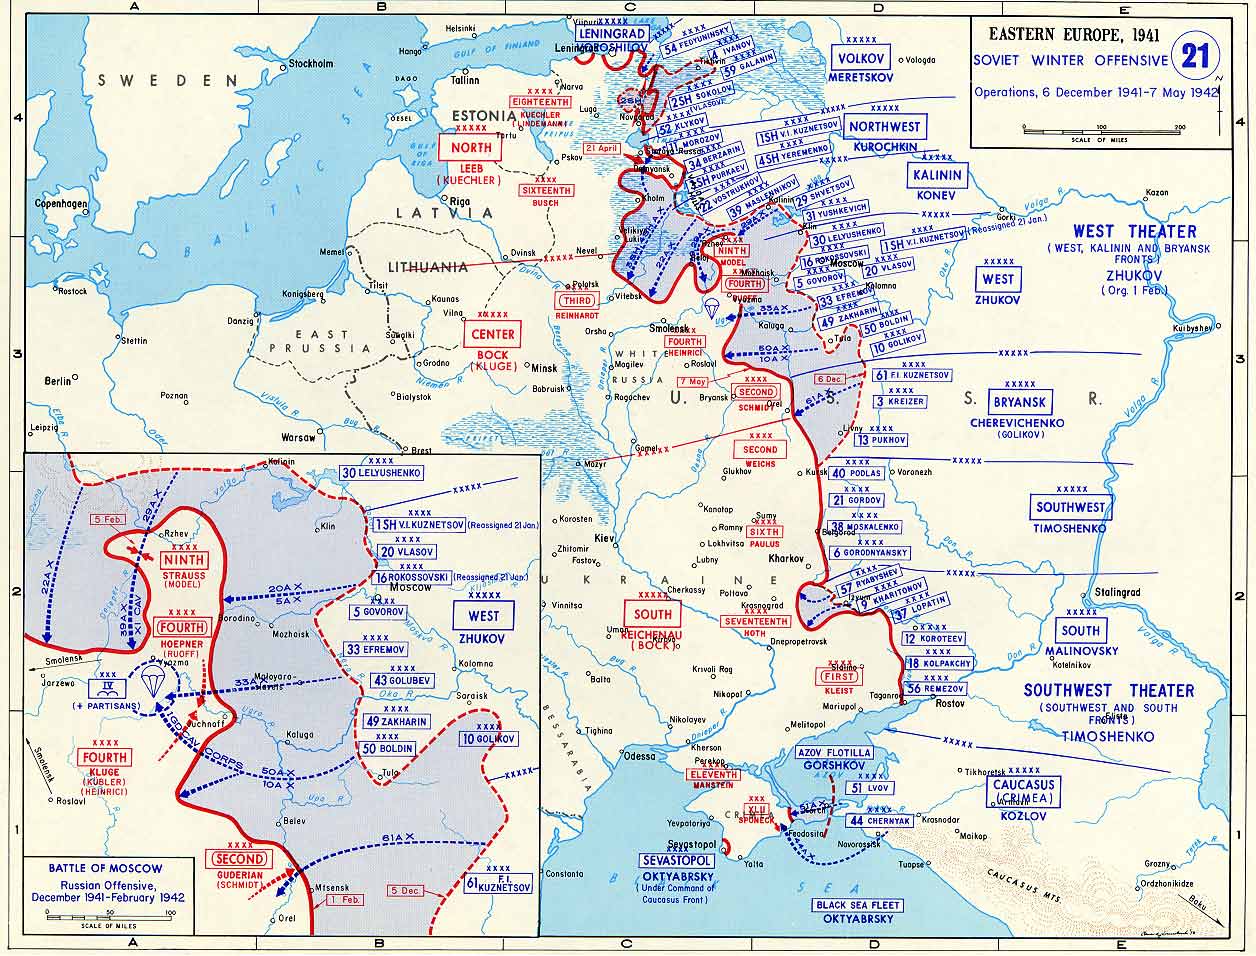 Map depicting the Soviet counter offensive of 6 Dec 1941-7 May 1942